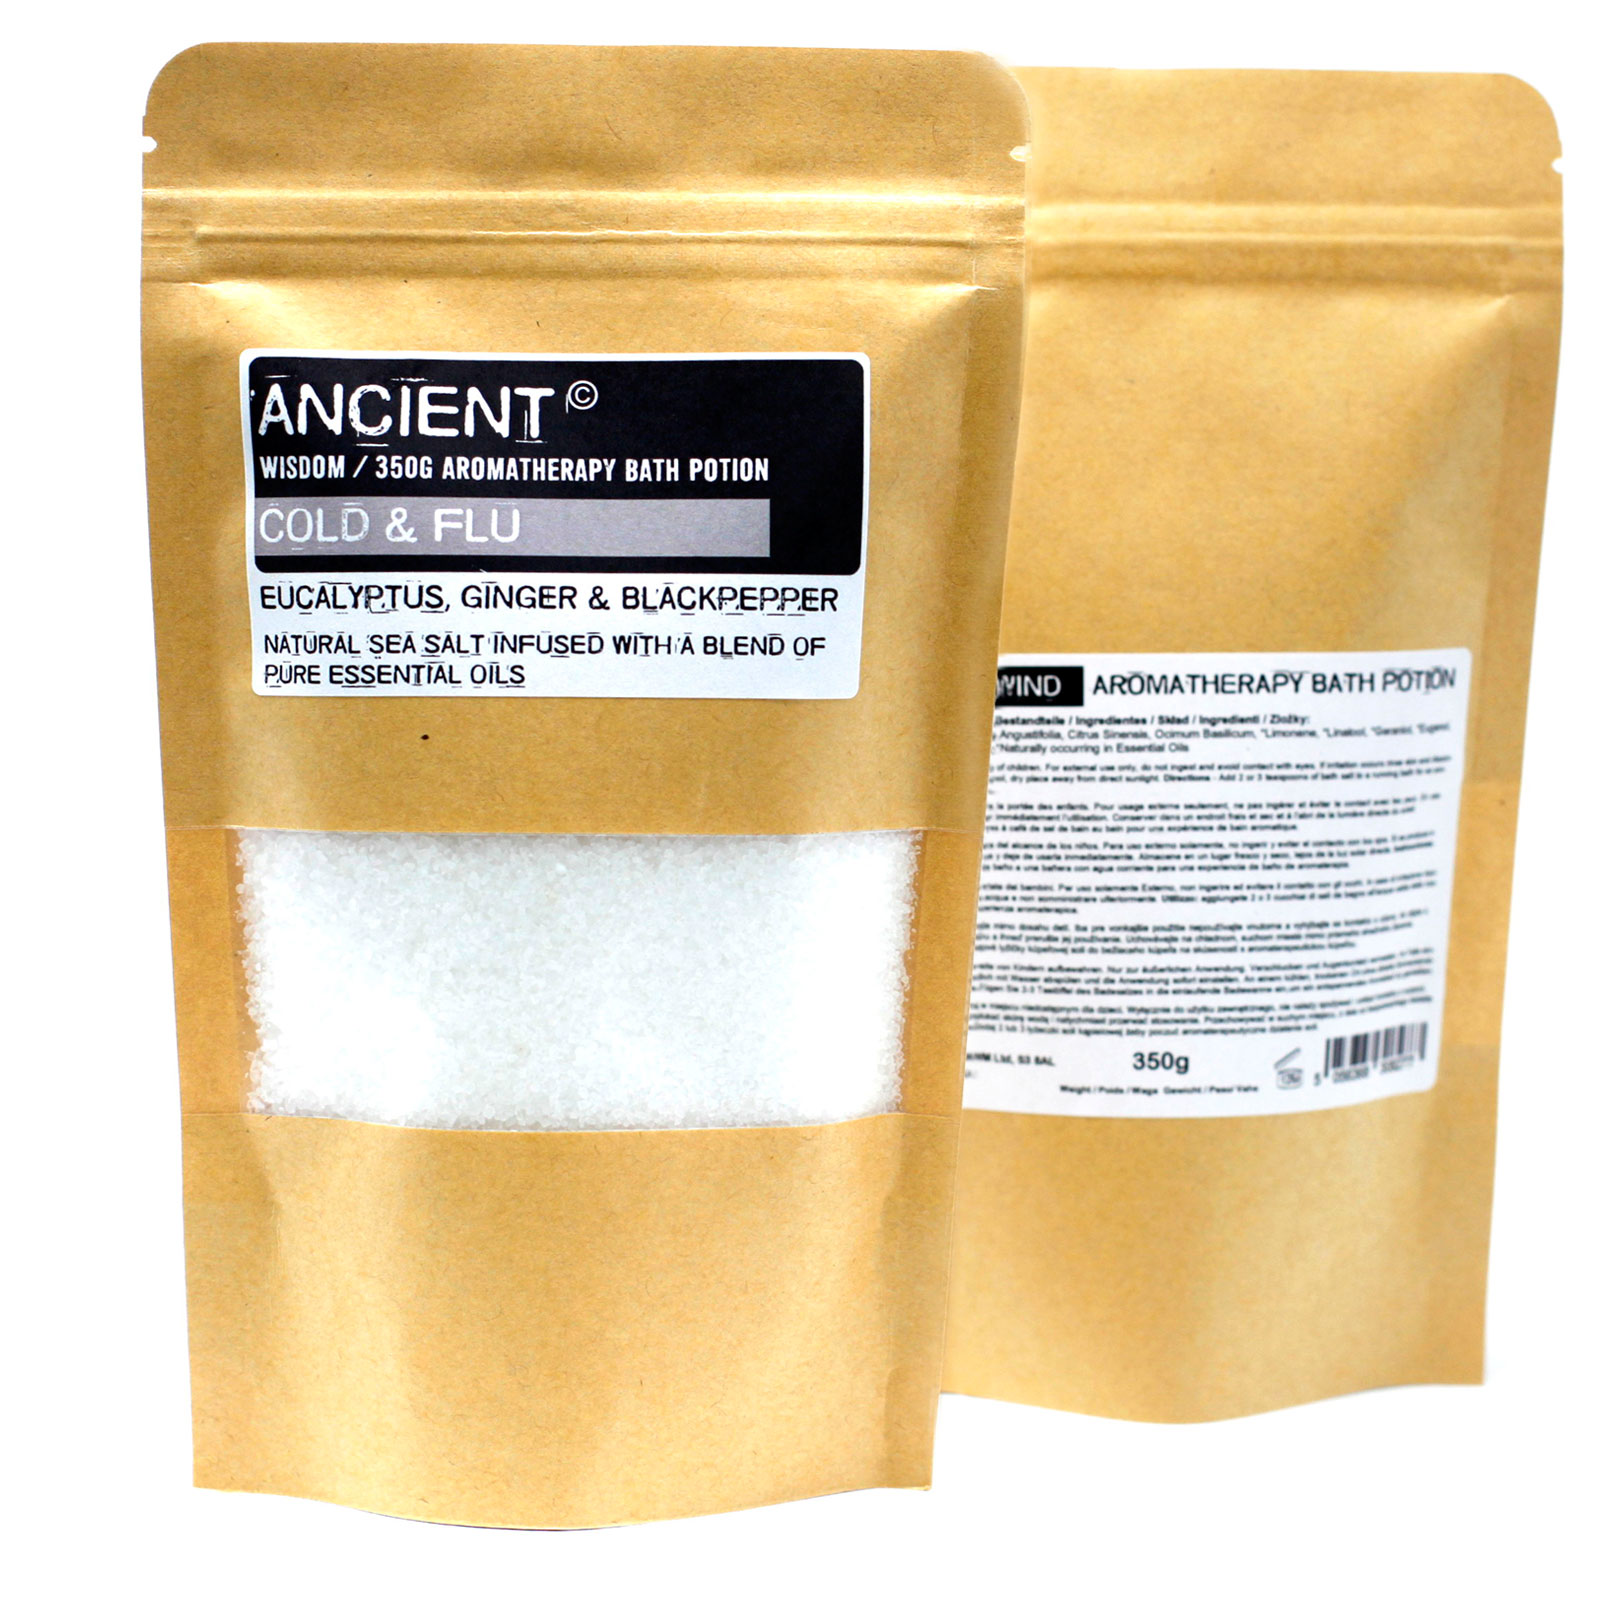 Aromatherapy Bath Potion in Kraft Bag 350g - Colds & Flu - Click Image to Close